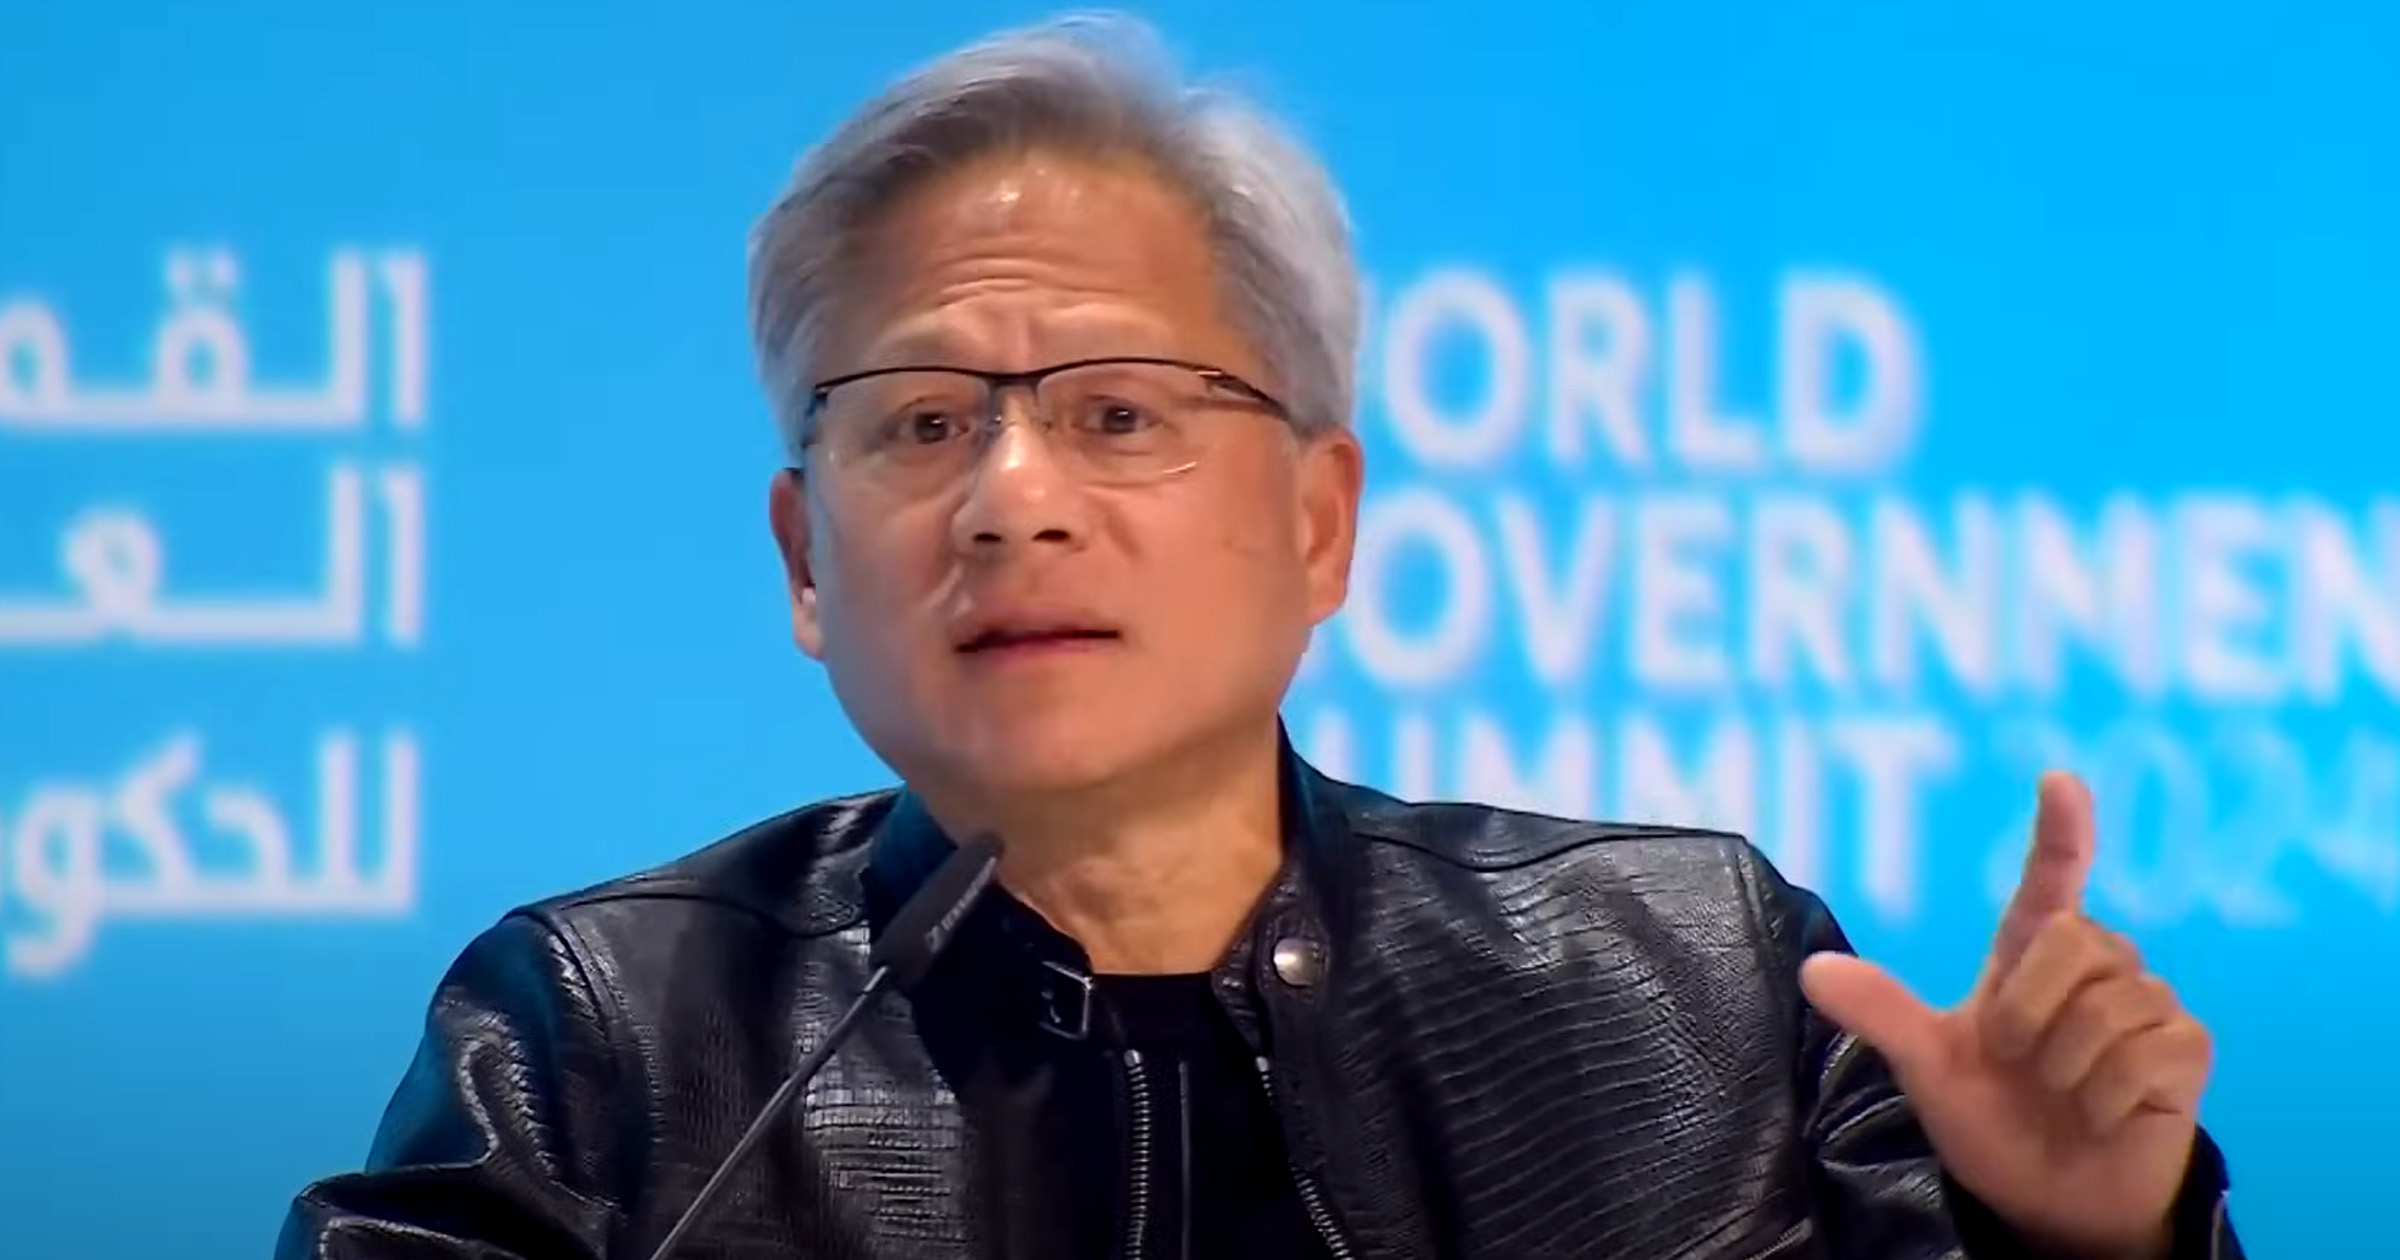 Don’t learn to code: Nvidia’s founder Jensen Huang advises a different career path